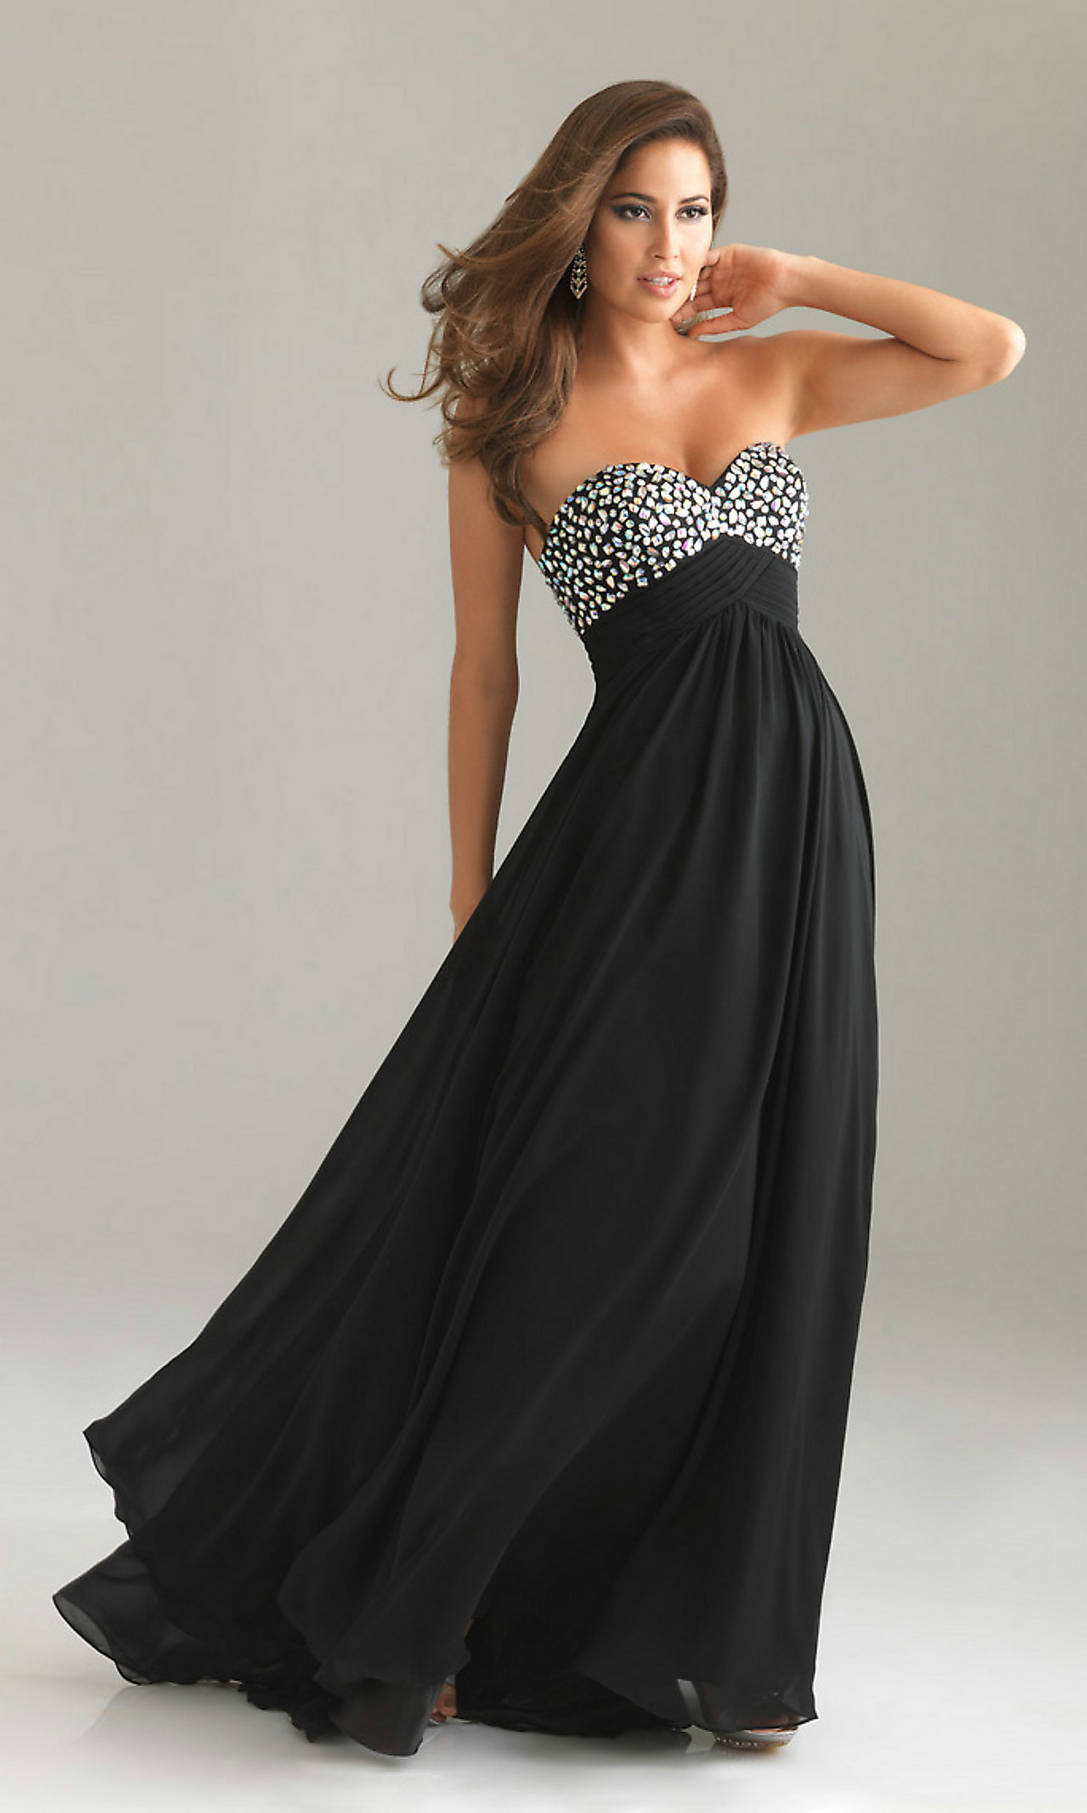 Party and evening dresses uk